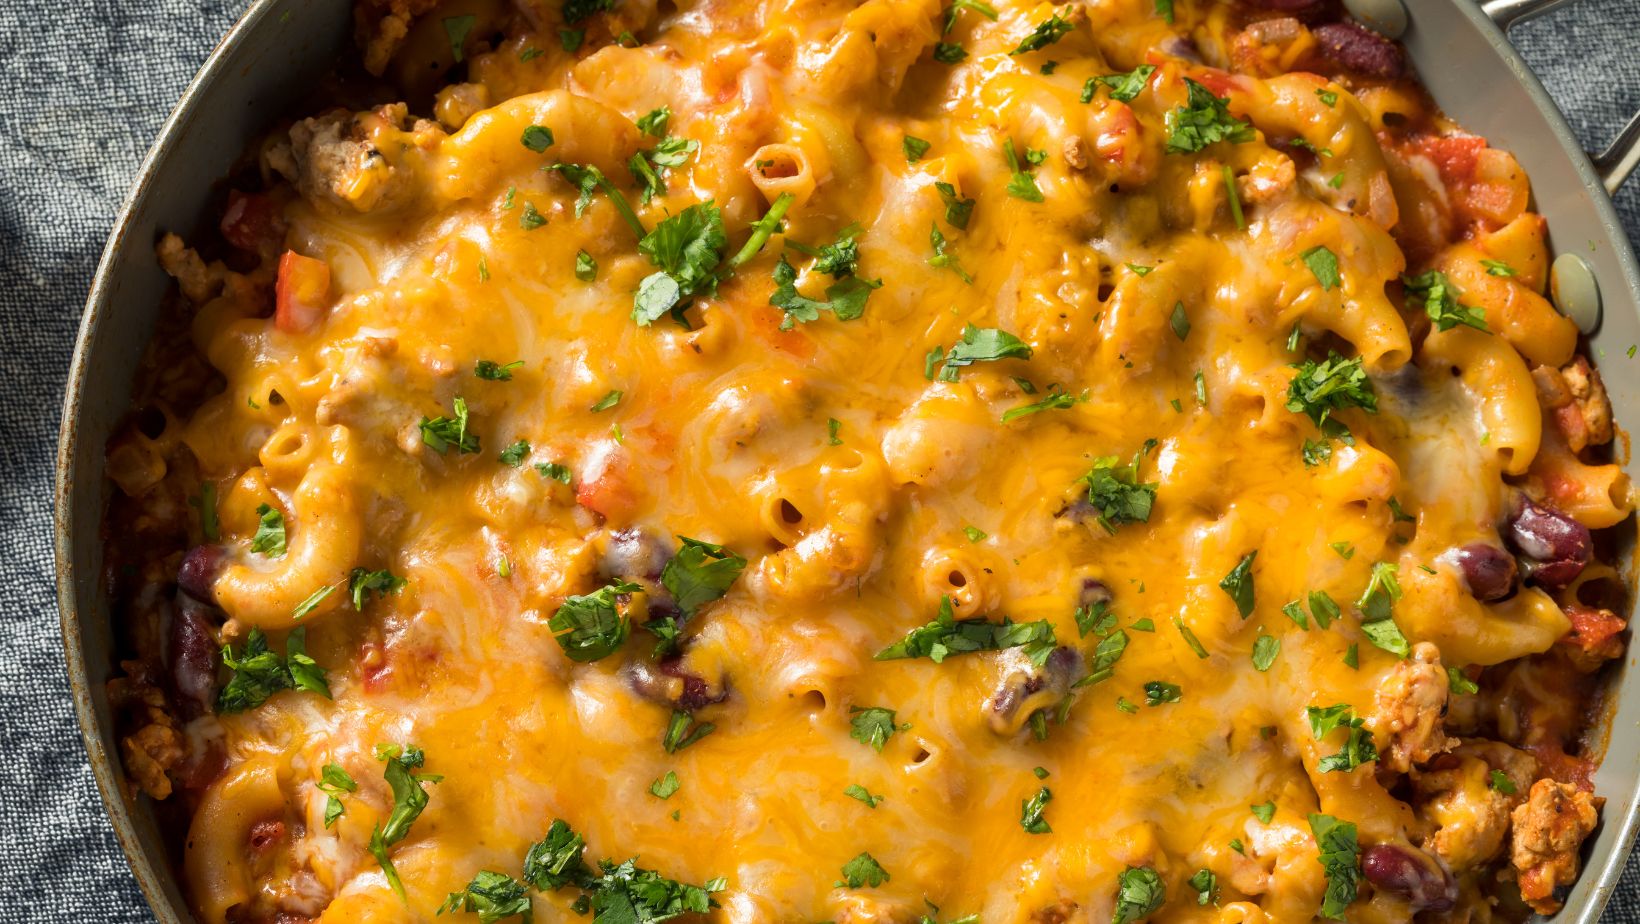 A zoomed in photo of a large pot of chili mac, topped with lots of cheese